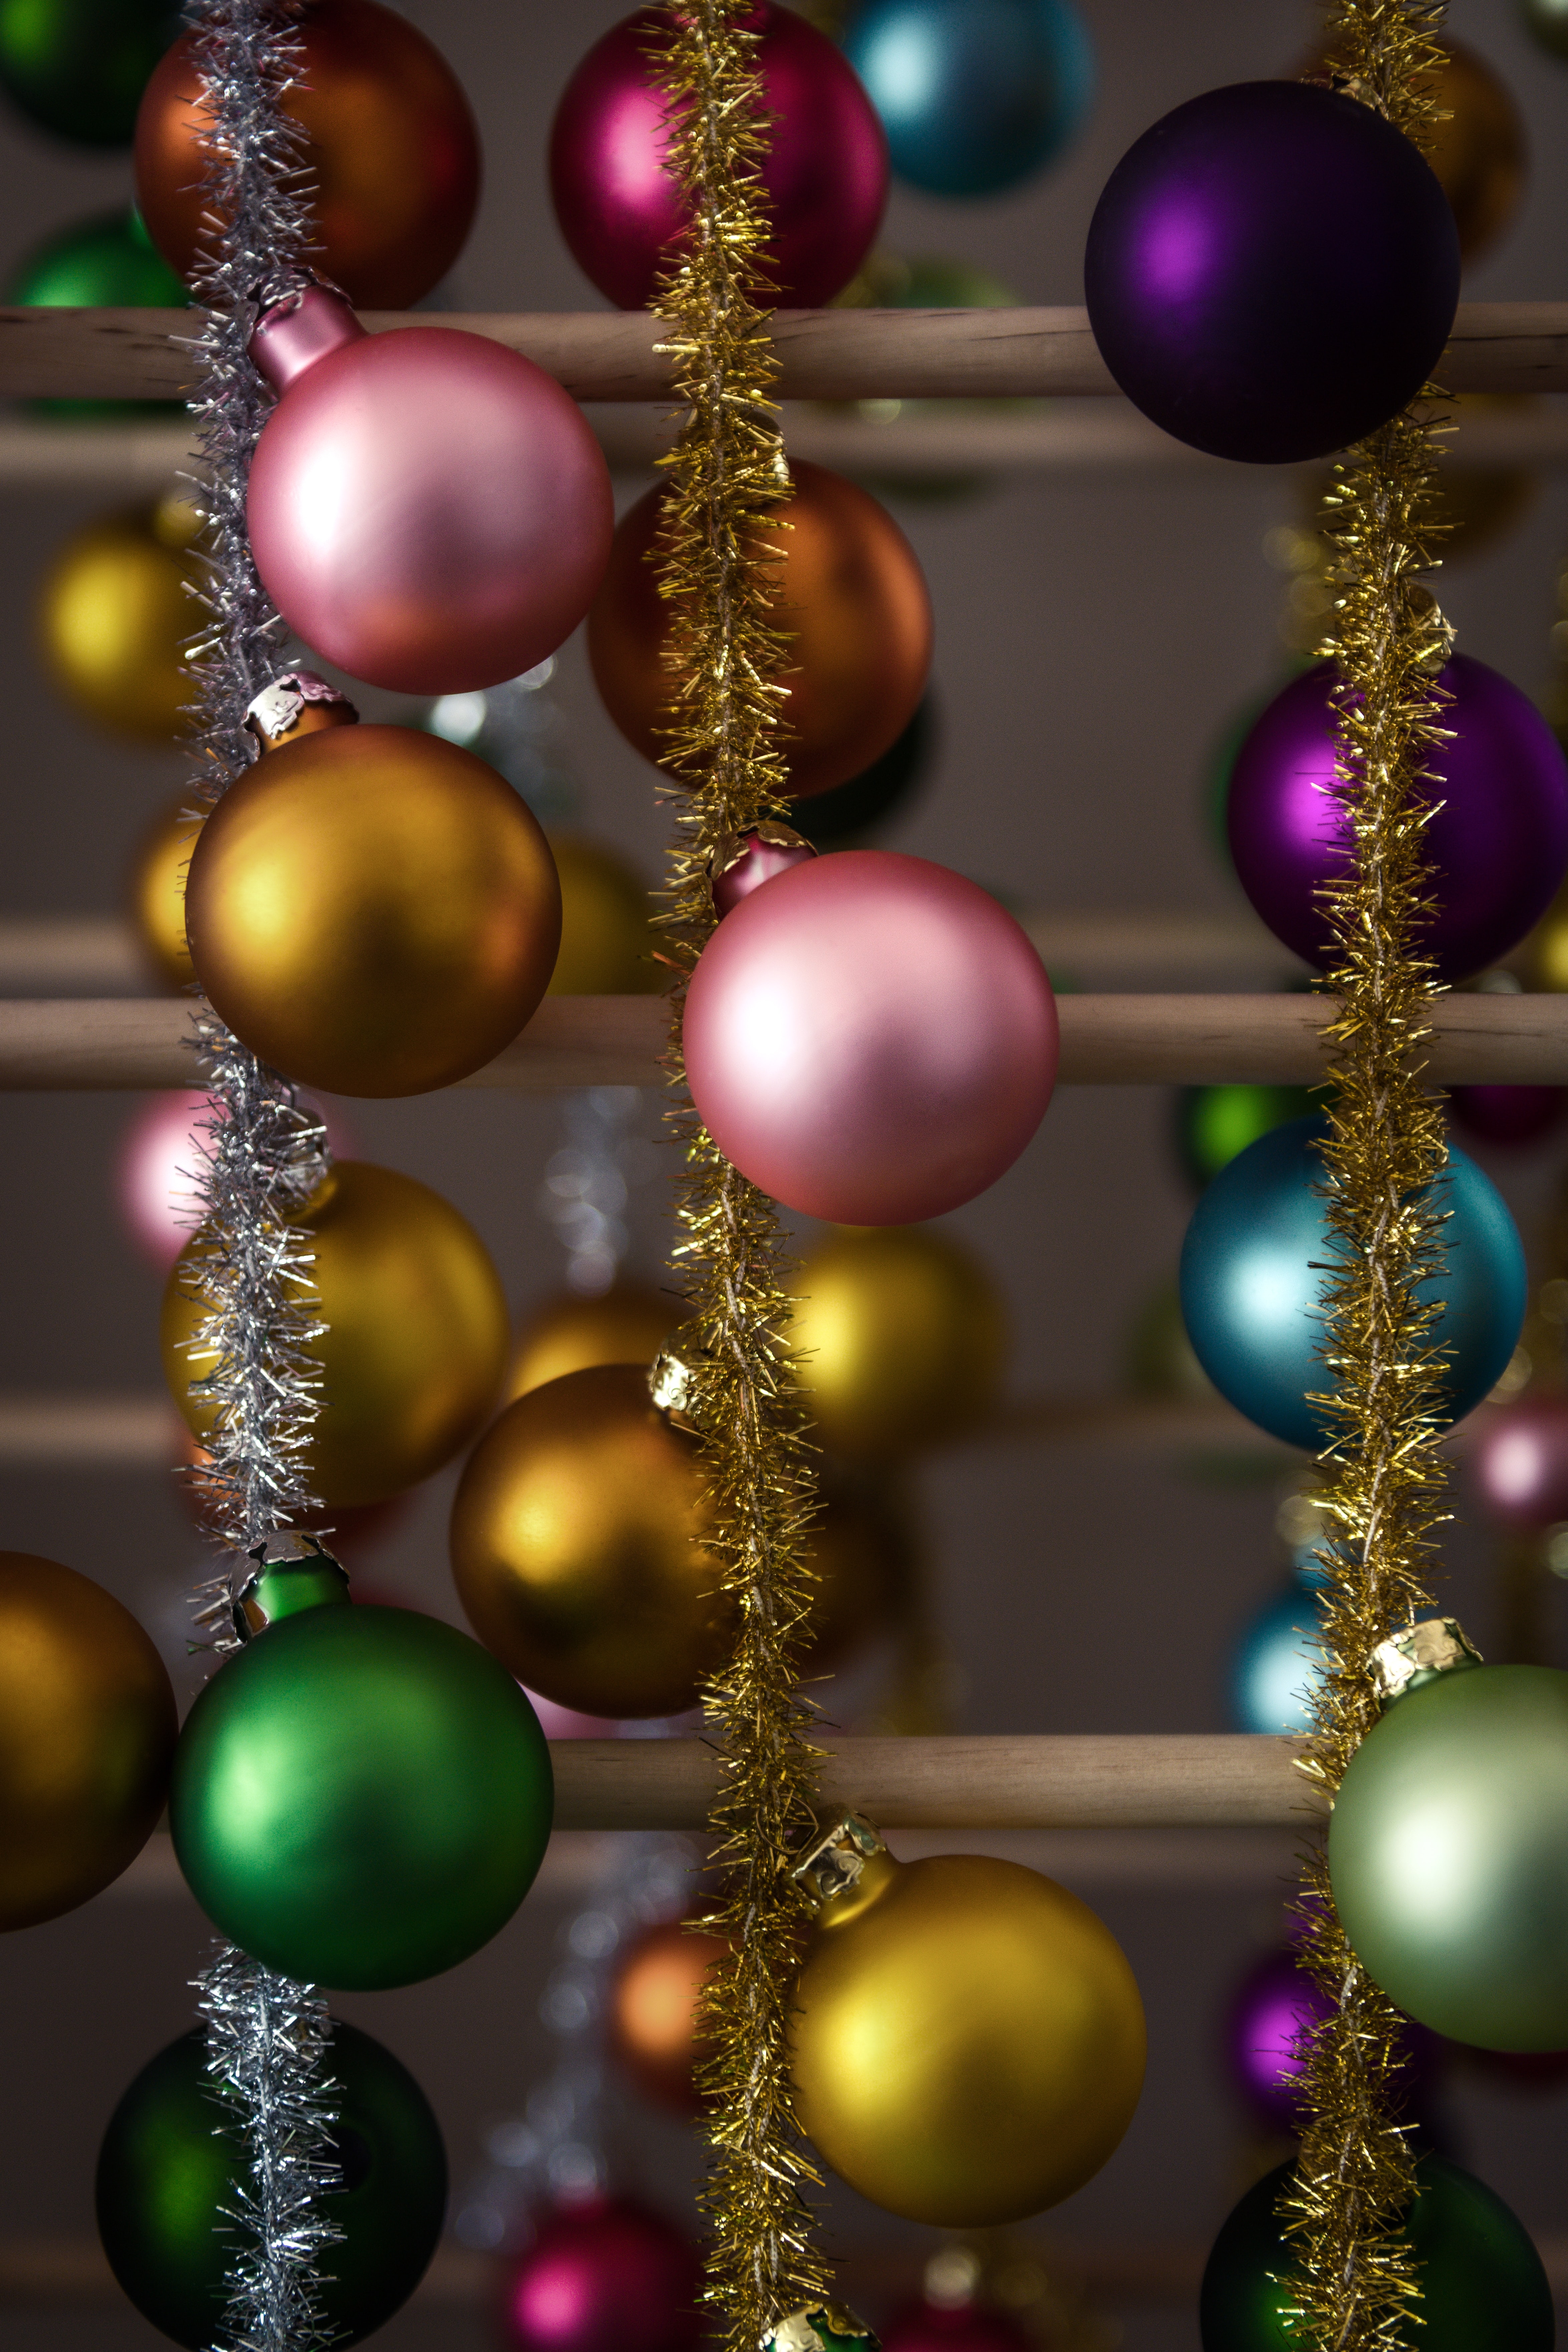 51776 download wallpaper holidays, new year, decorations, multicolored, motley, christmas, tinsel, balls screensavers and pictures for free